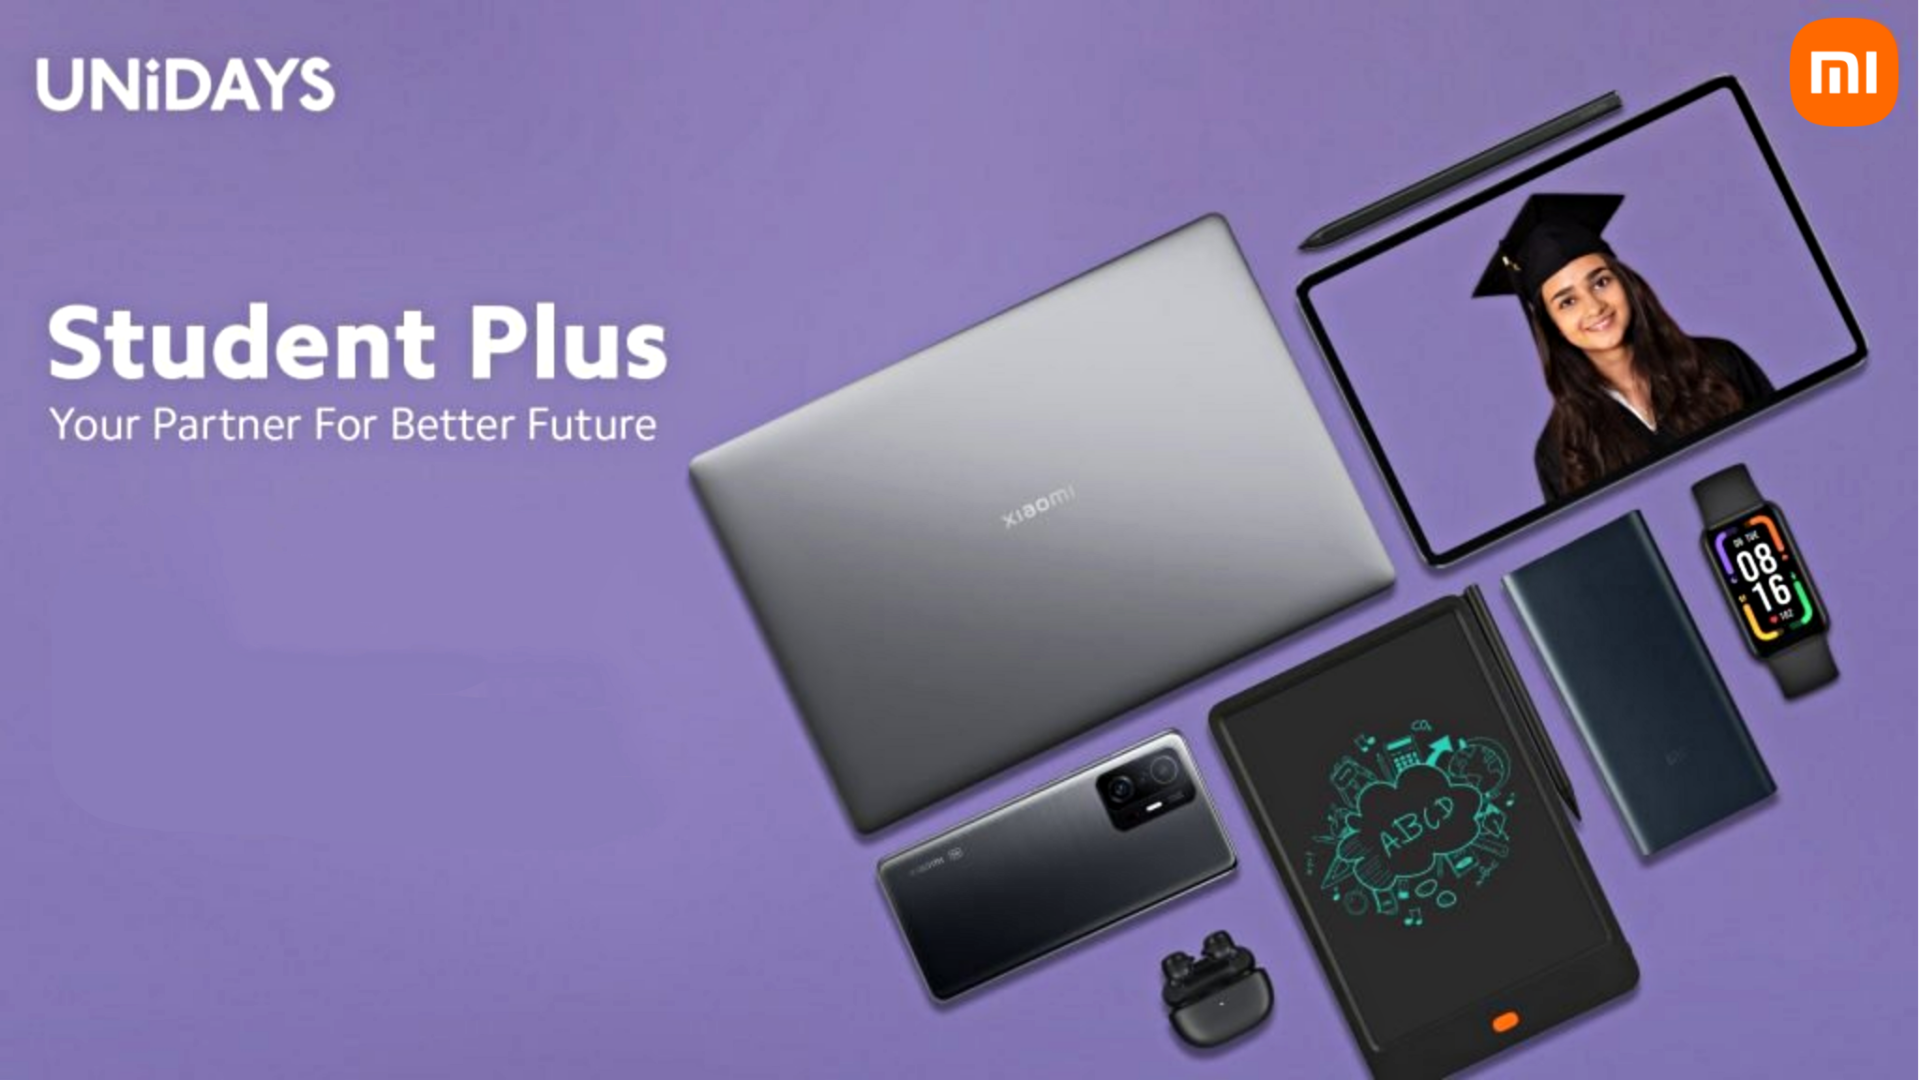 Xiaomi India introduces Student Plus program: Here's how to apply